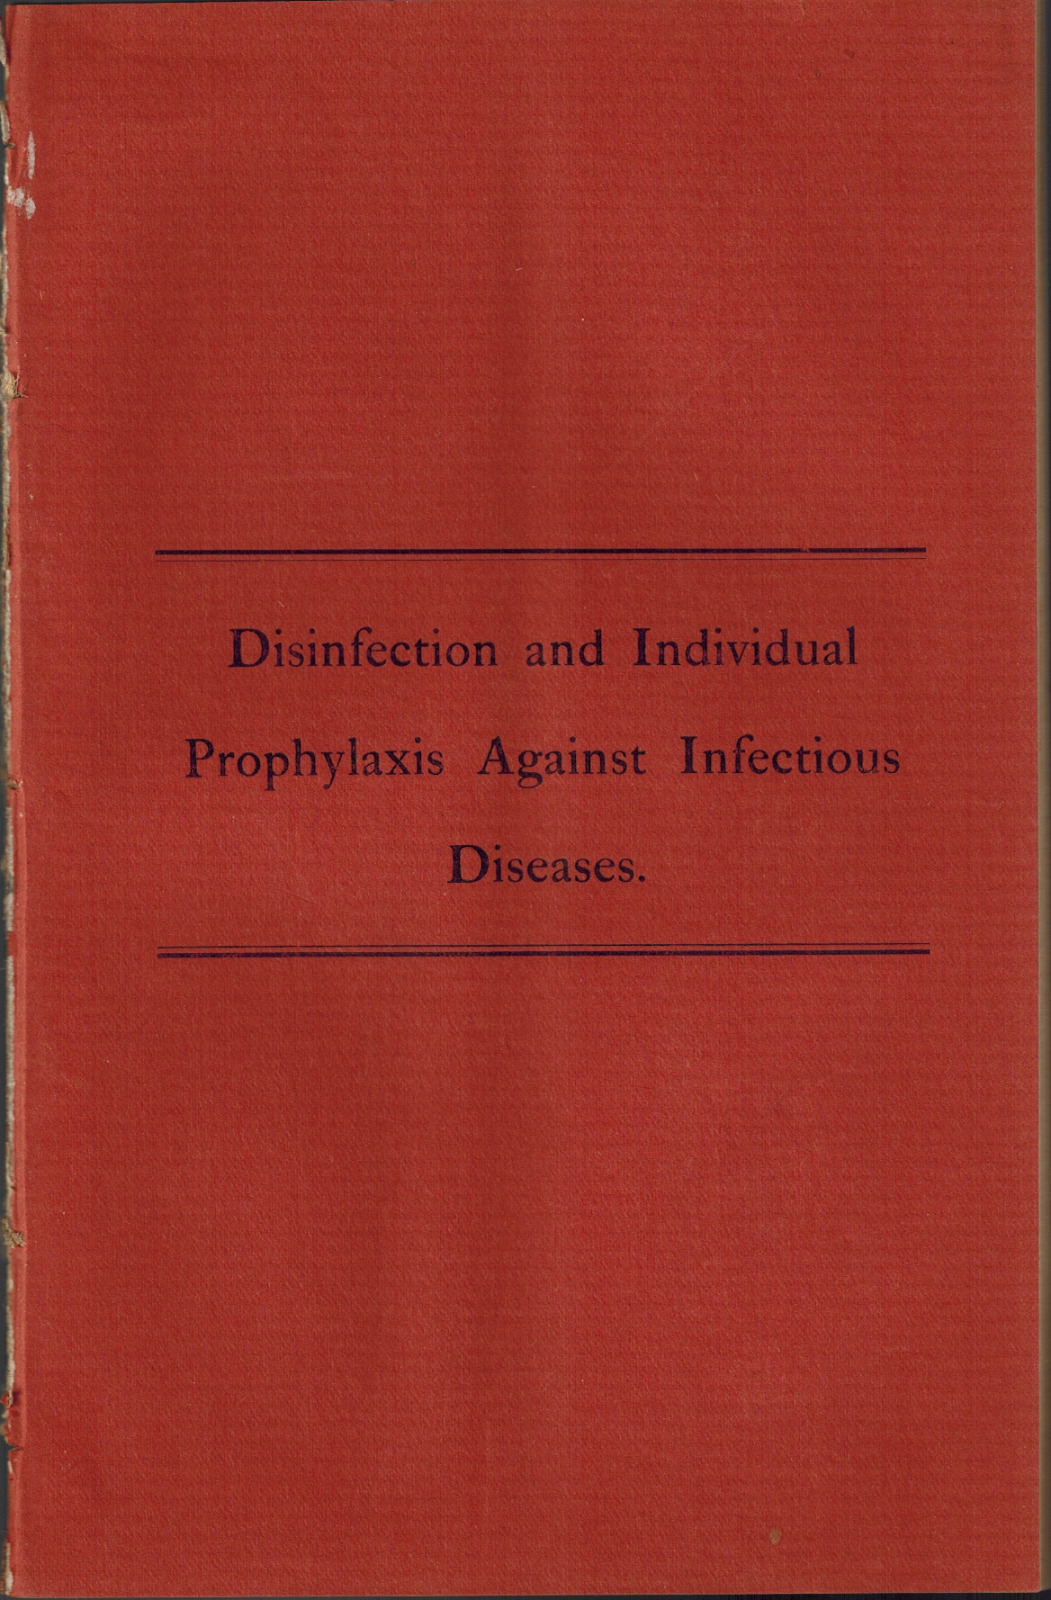 1886 Disinfection Preventing Spread of Infectious Disease, Pandemic, Lomb Prize